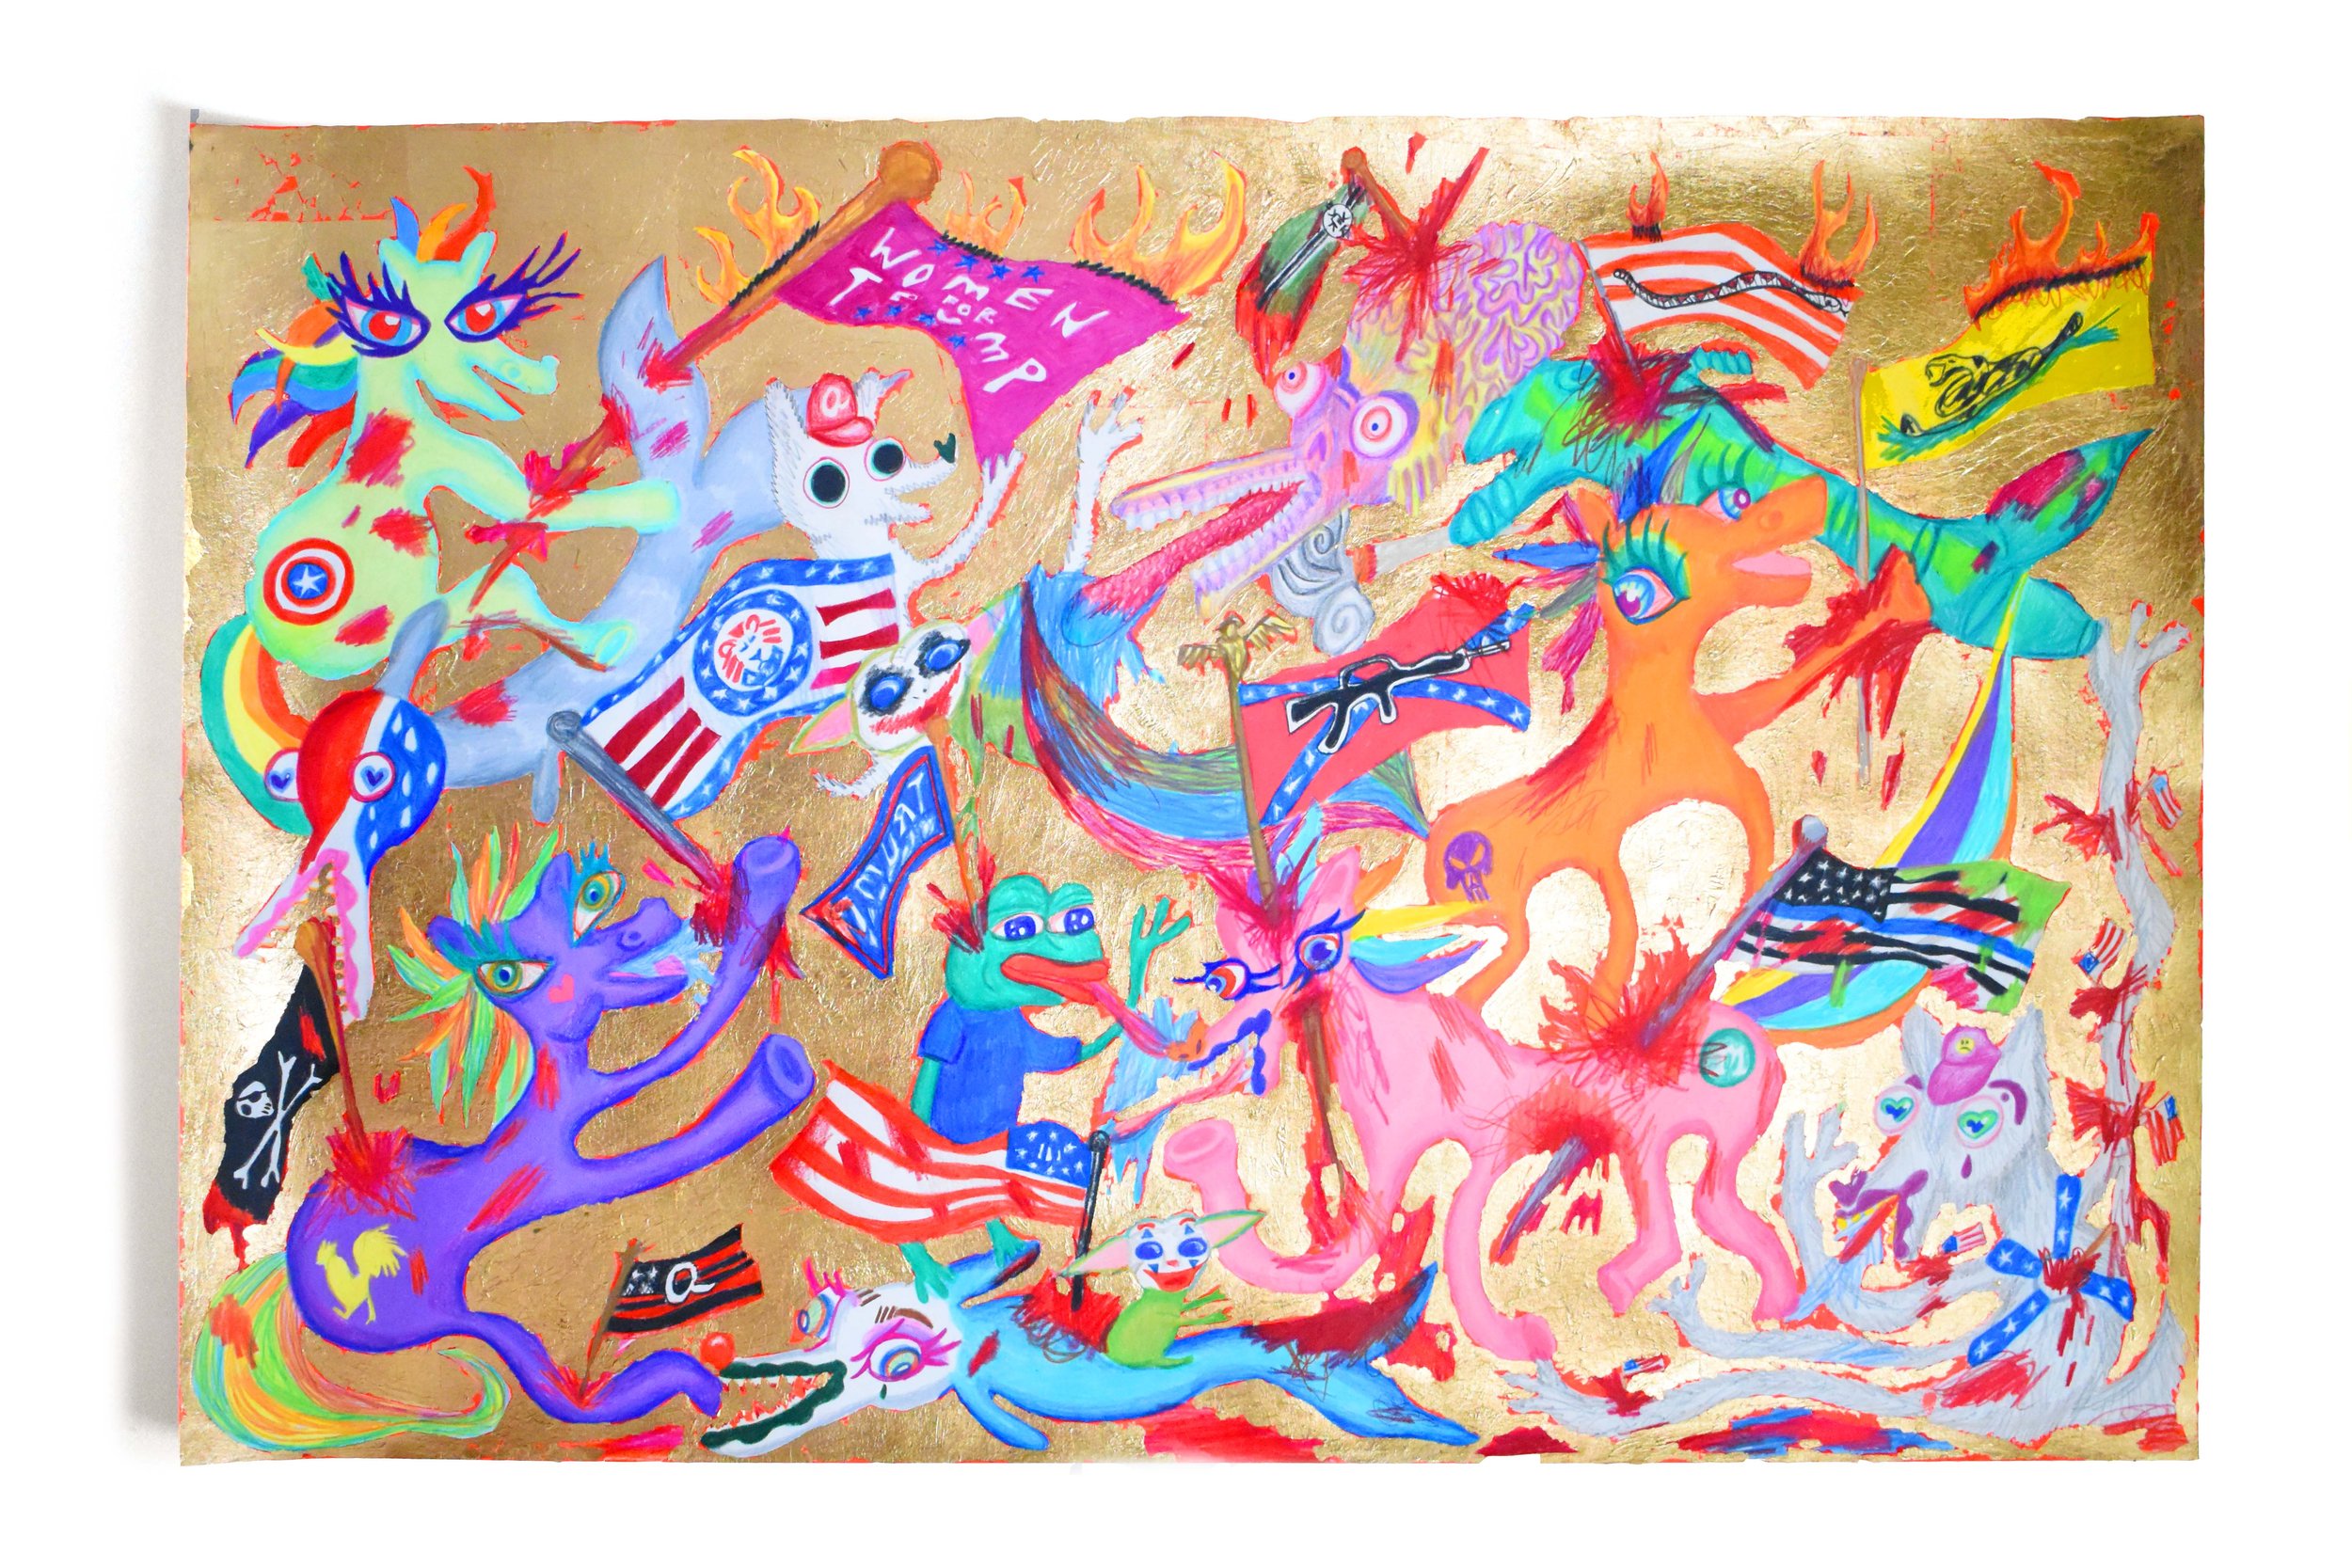   Stabbed by Flags,  2021  26 x 40 inches (66.04 x 101.6 cm.)  Colored pencil, acrylic paint, and gold leaf on paper 